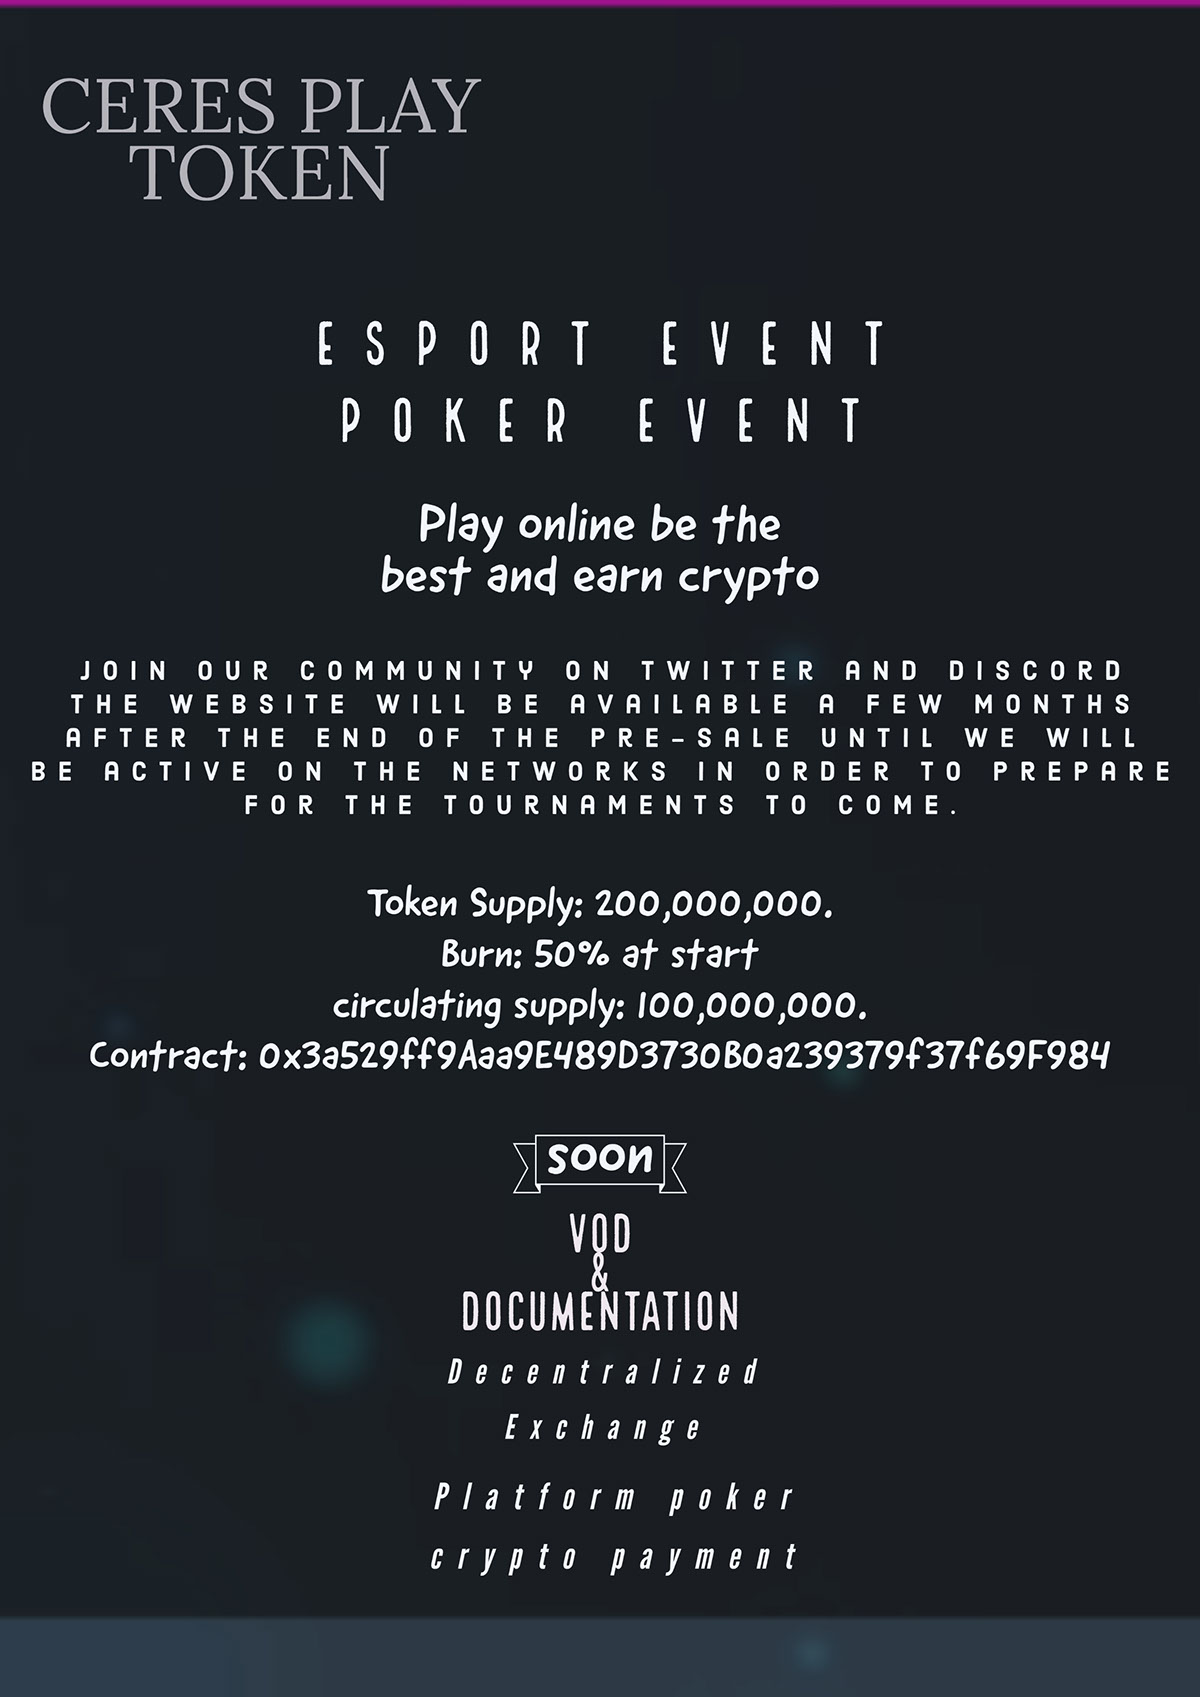 CERES PLAY TOKEN CERES PLAY TOKEN Esport Event Poker Event soon VOD & Documentation Play online be the best and earn crypto Platform poker crypto payment Decentralized Exchange Token Supply:                         200,000,000. Burn: 50% at start circulating supply:             100,000,000. ​ Contract:  0x3a529ff9Aaa9E489D3730B0a239379f37f69F984 Join our community on twitter and discord the website will be available a few months after the end of the pre-sale until we will be active on the networks in order to prepare for the tournaments to come.